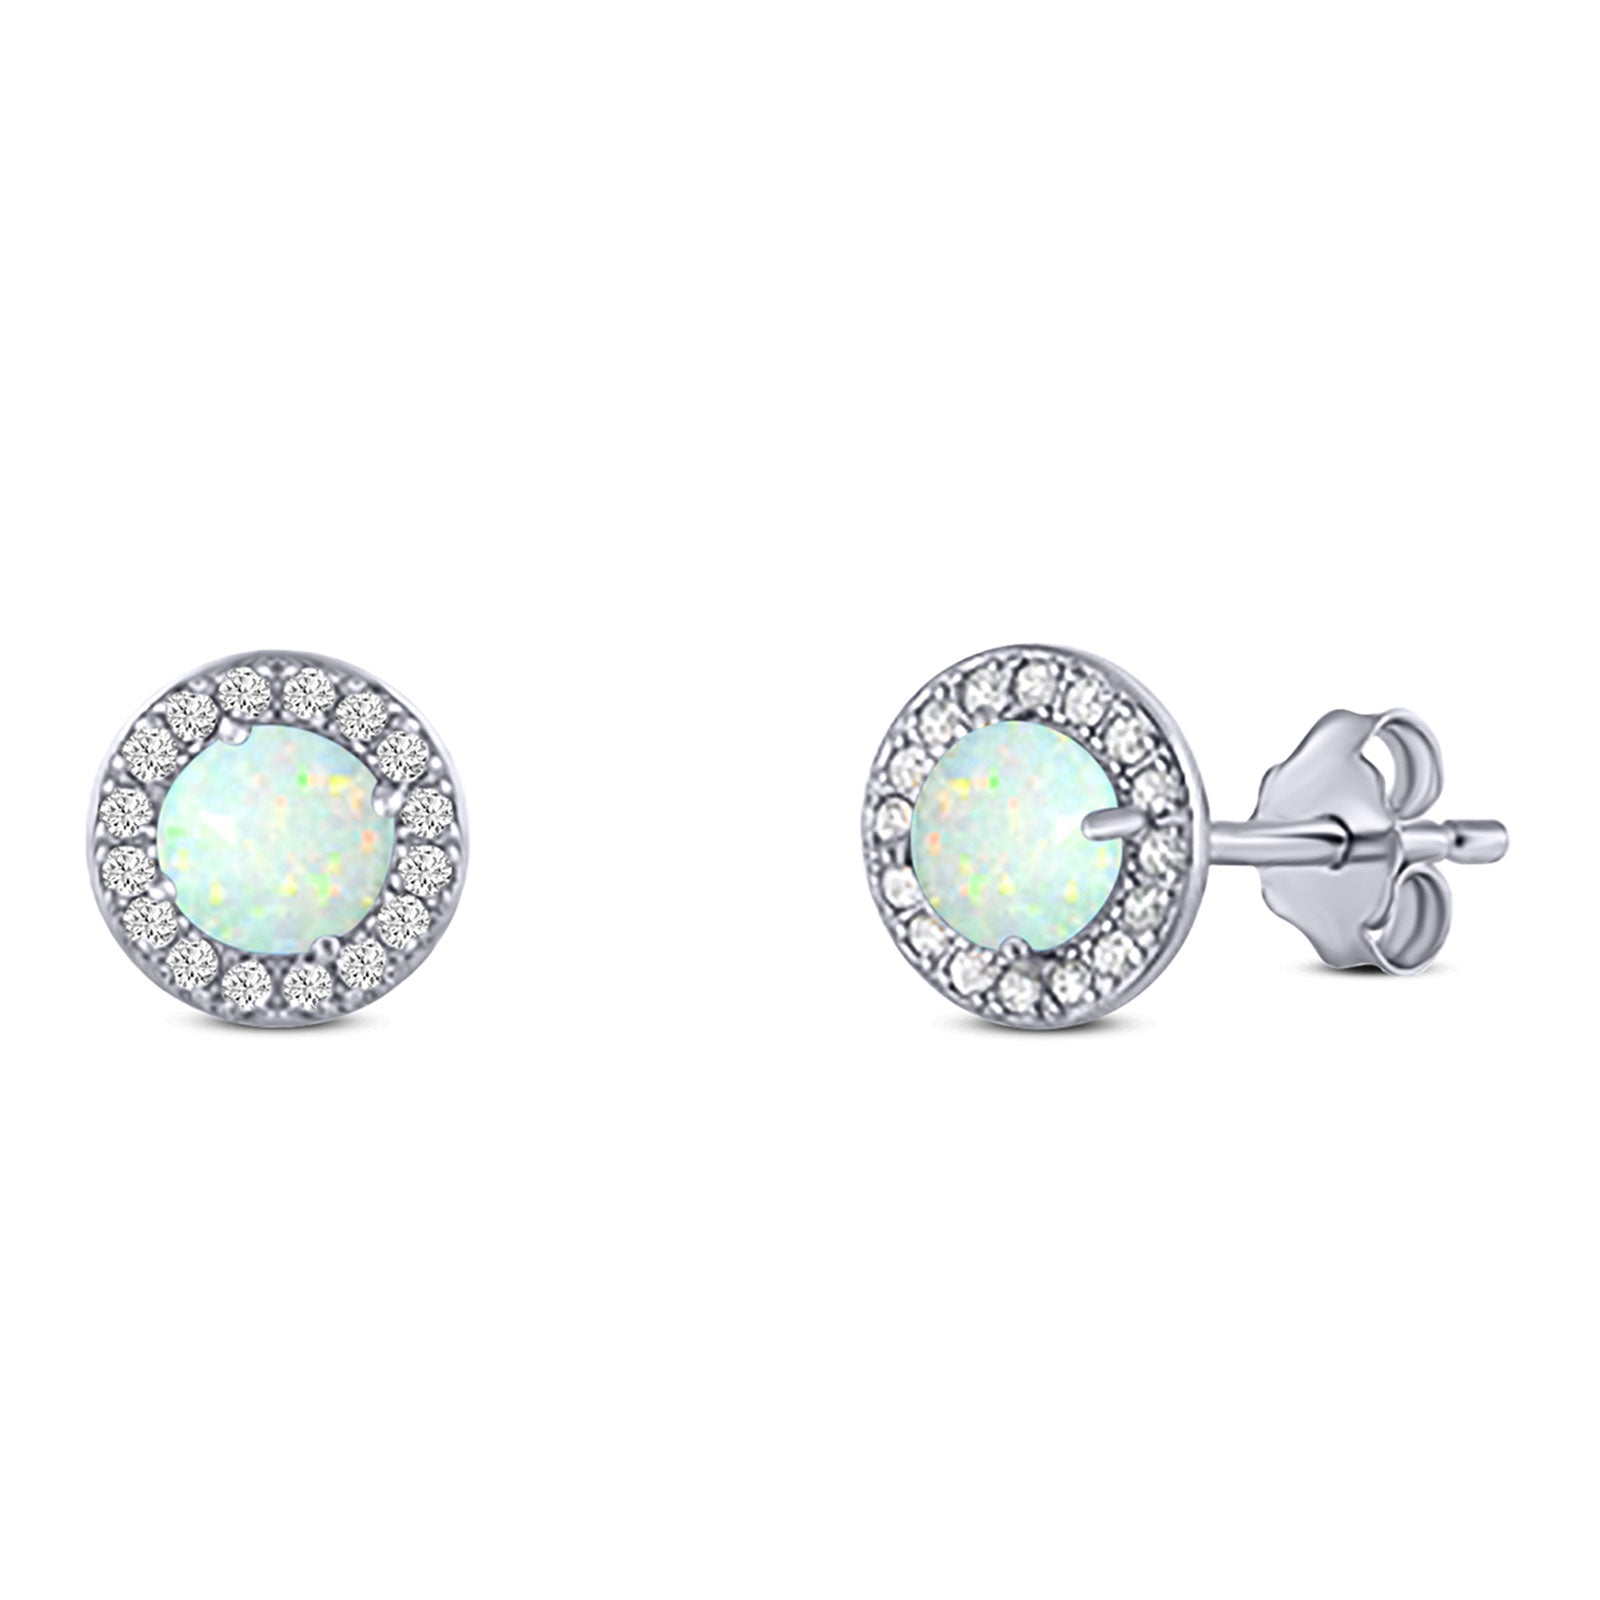 Halo Art Deco Stud Earring Round Simulated Cubic Zirconia Created White Opal Solid 925 Sterling Silver (8.2mm)